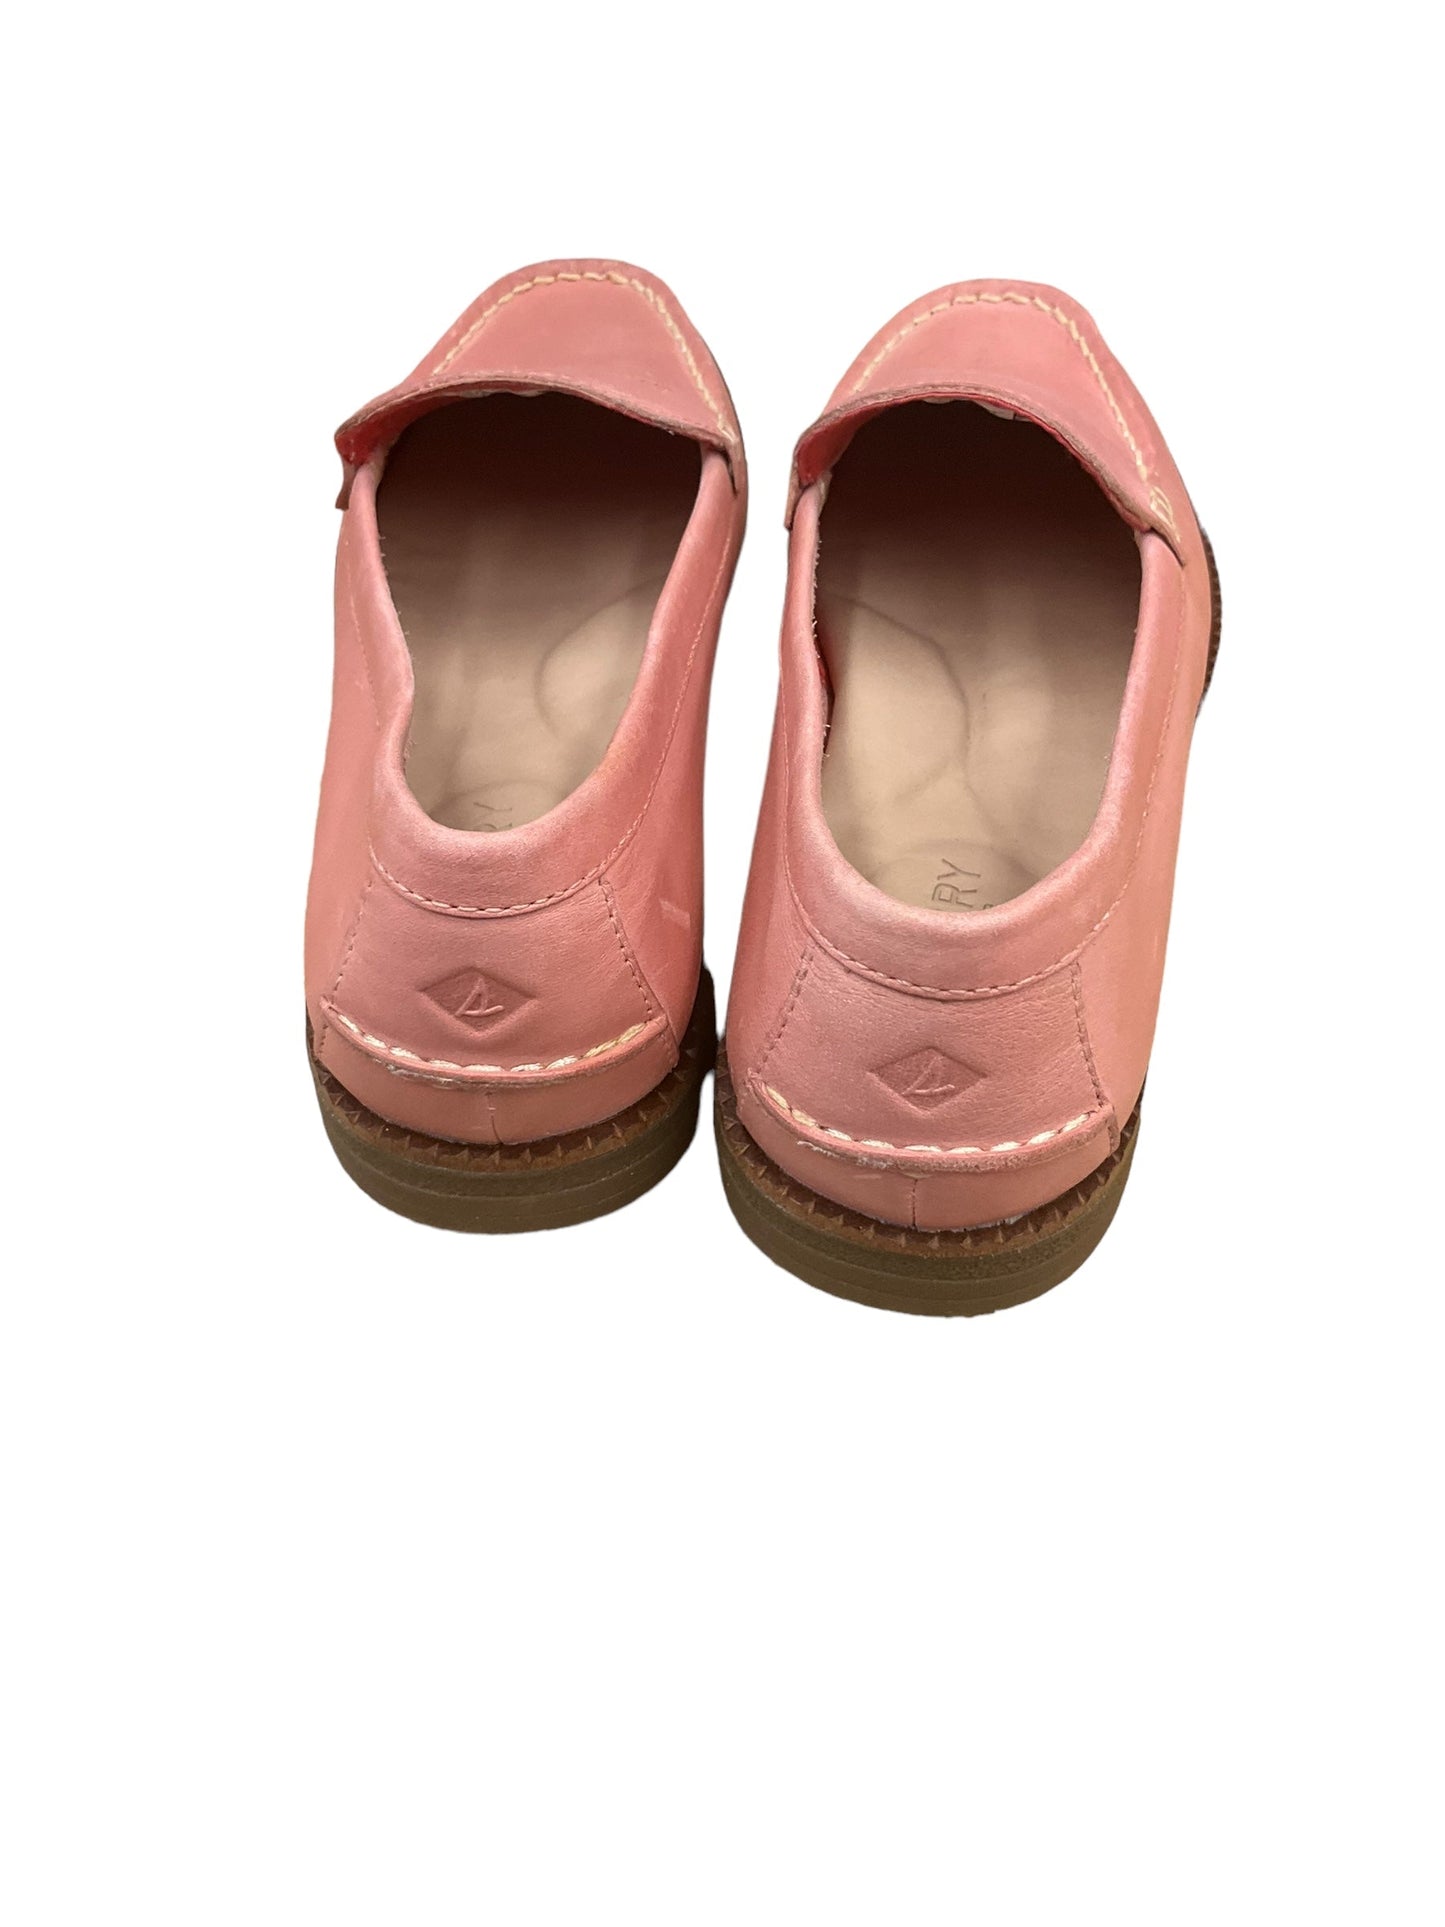 Pink Shoes Flats Sperry, Size 8